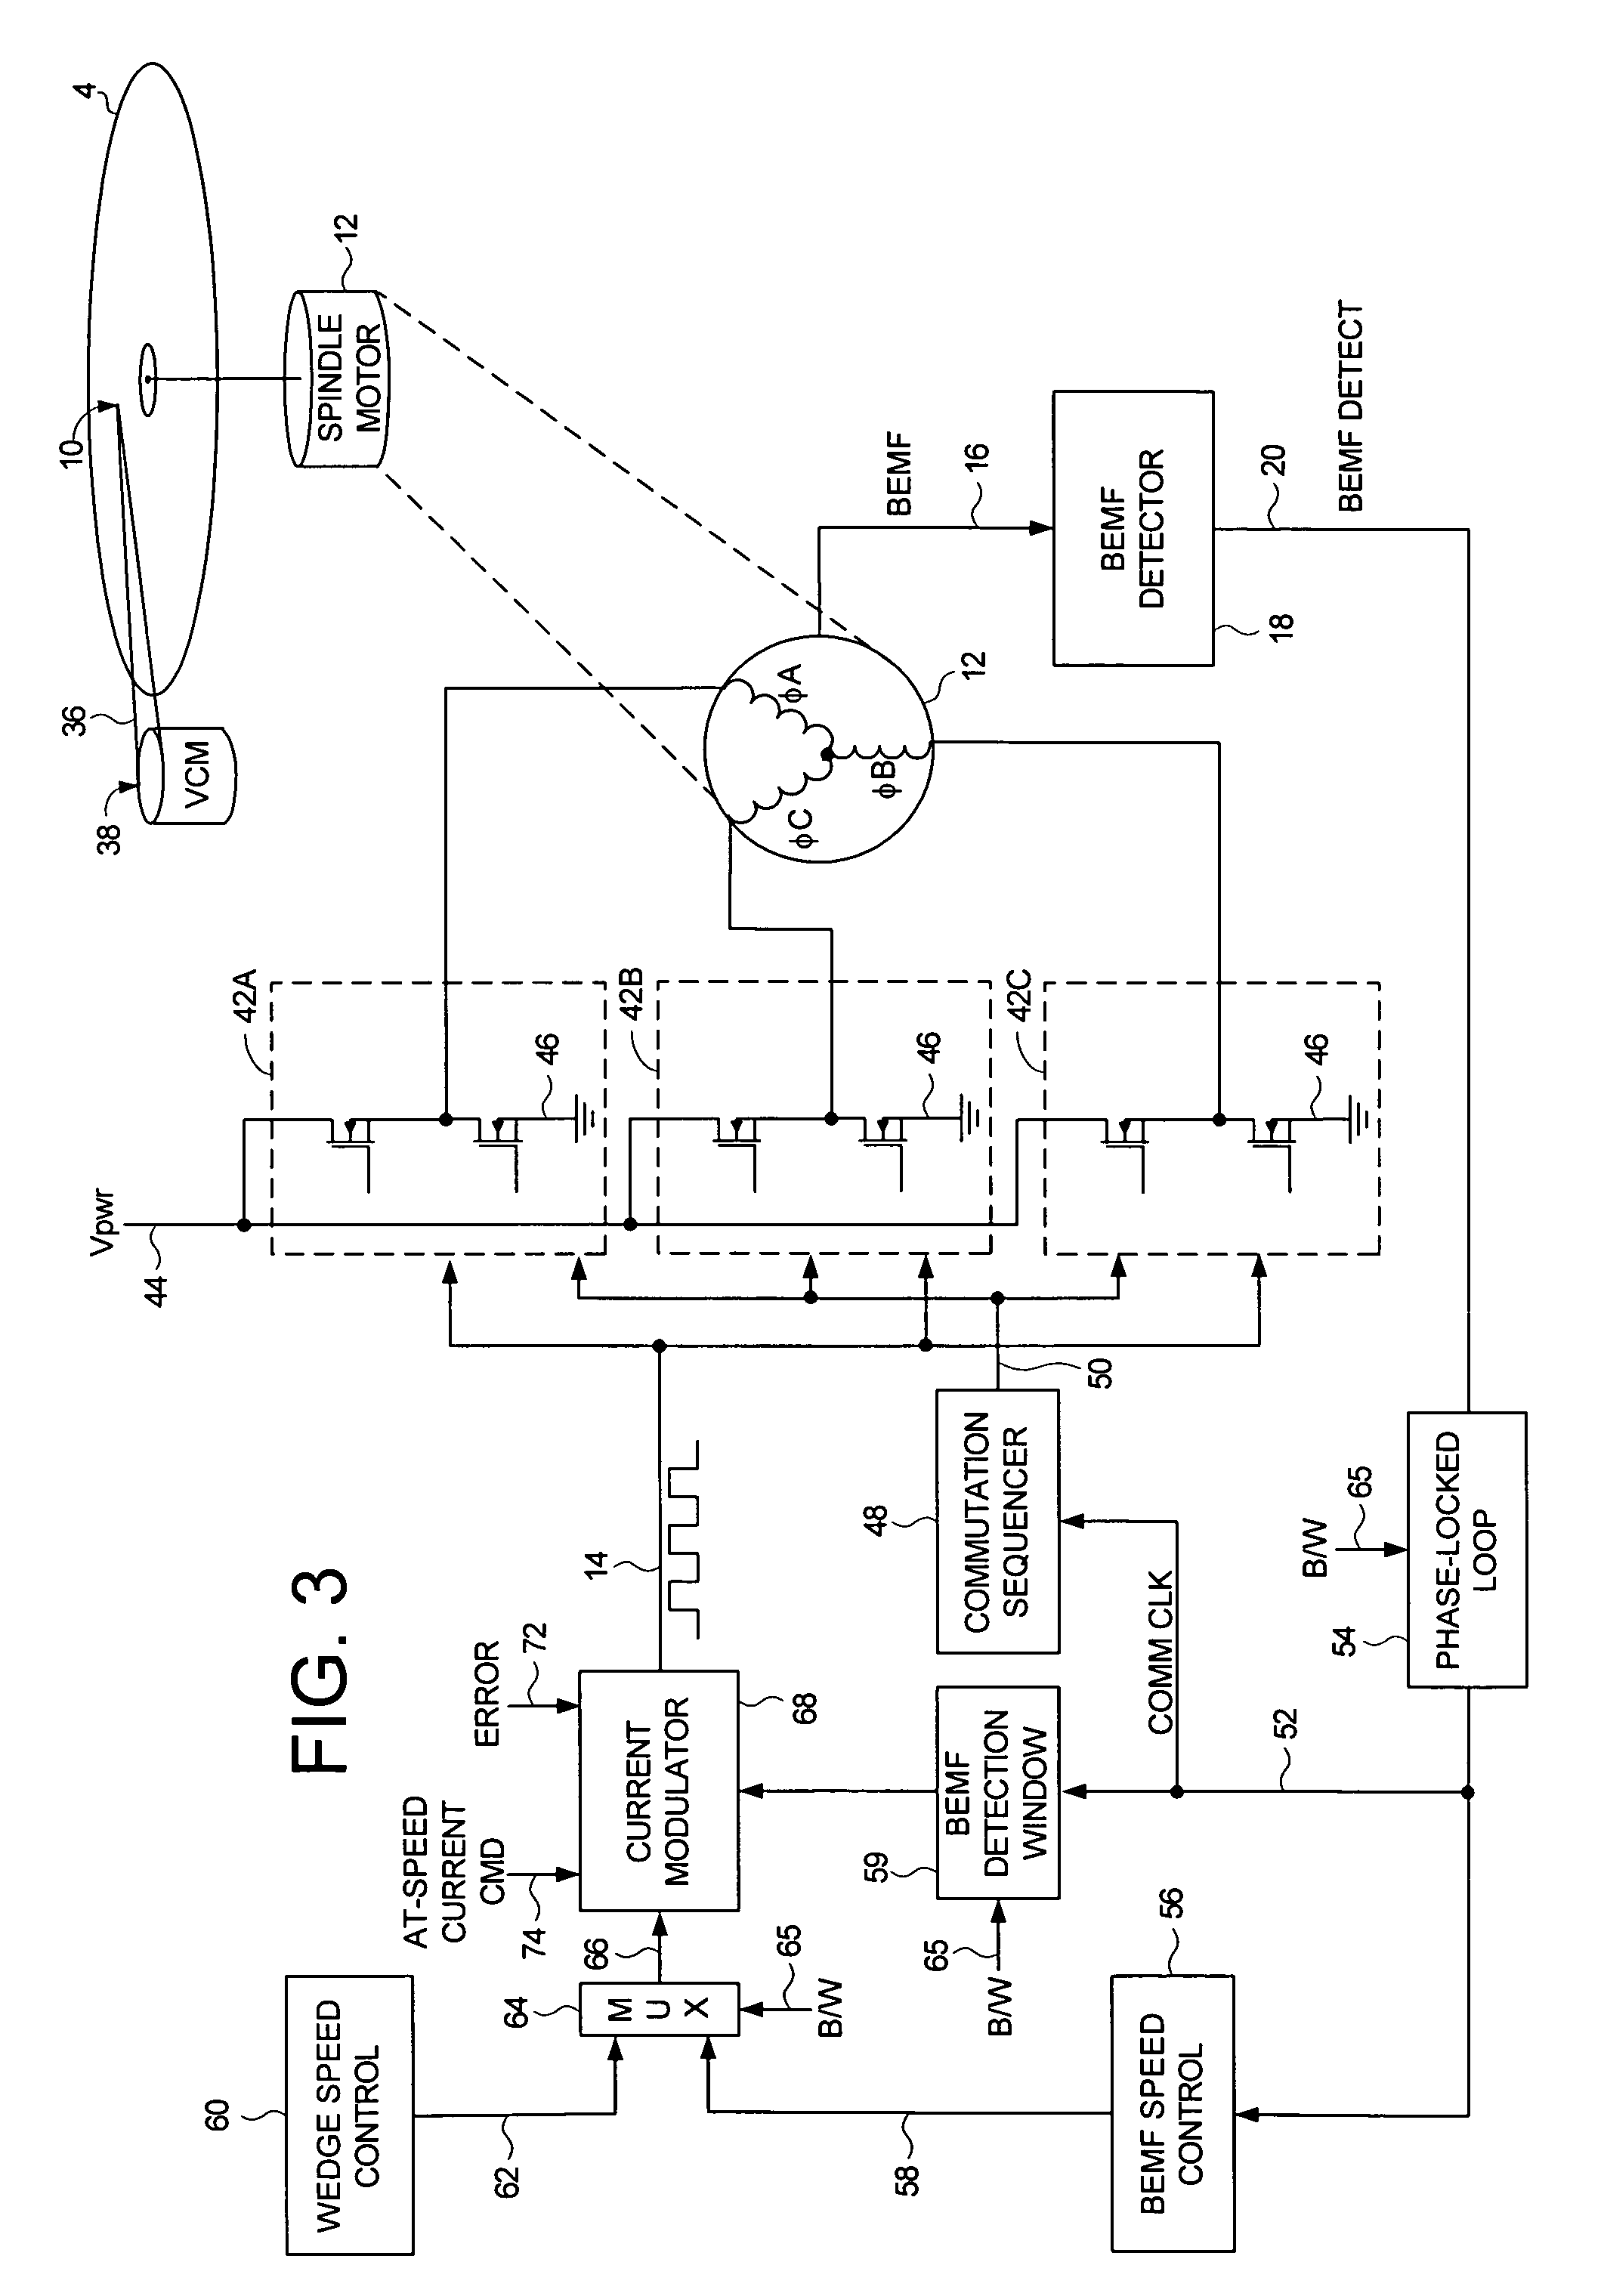 Disk drive employing wedge spindle speed control with eccentricity compensation